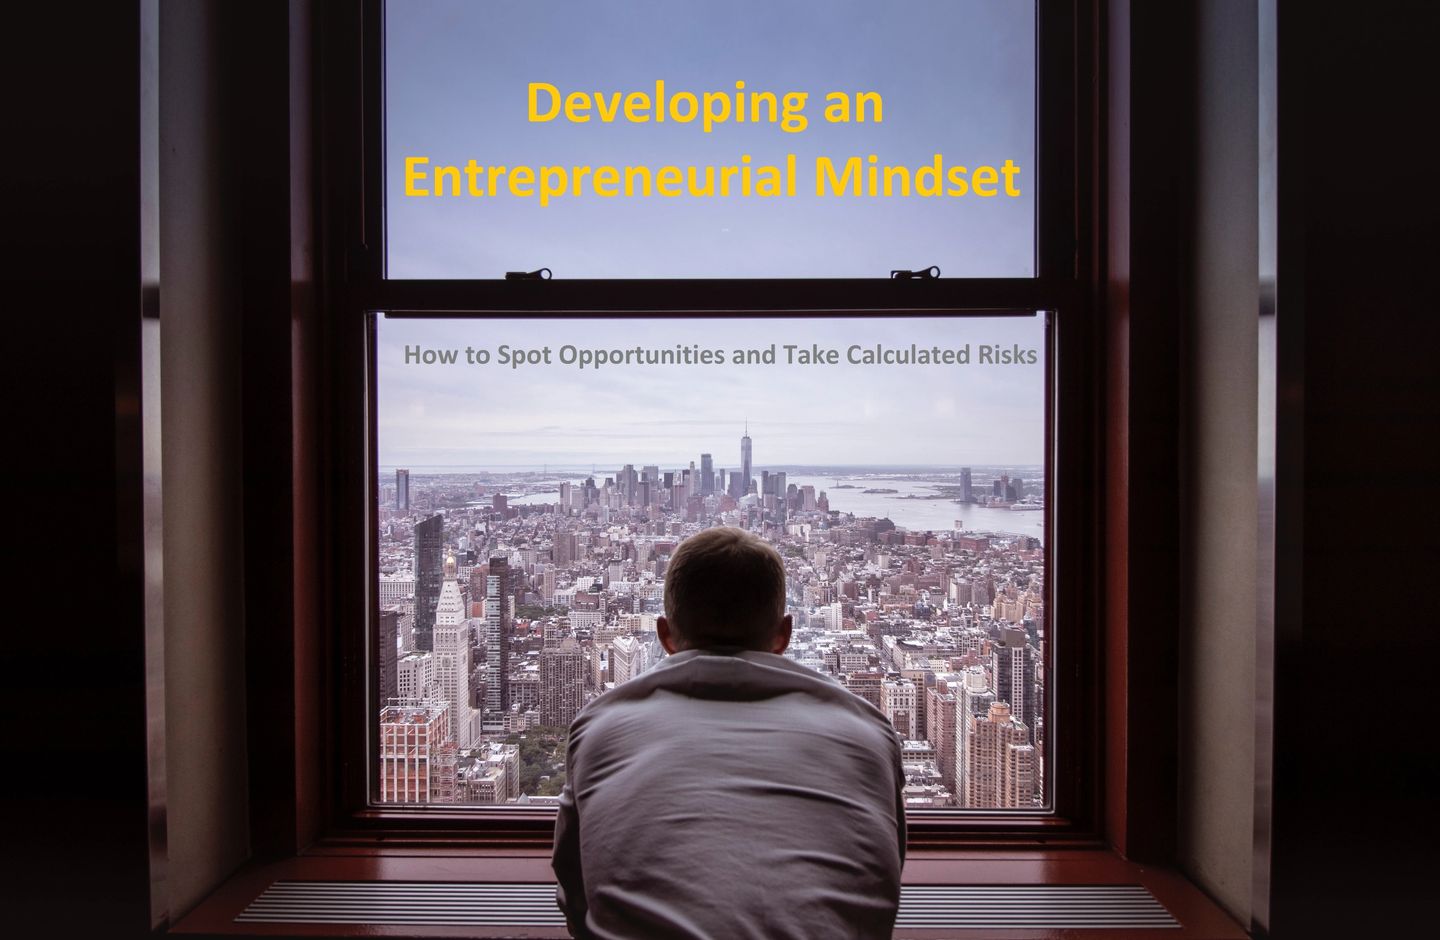 Developing an Entrepreneurial Mindset: How to Spot Opportunities and Take Calculated Risks